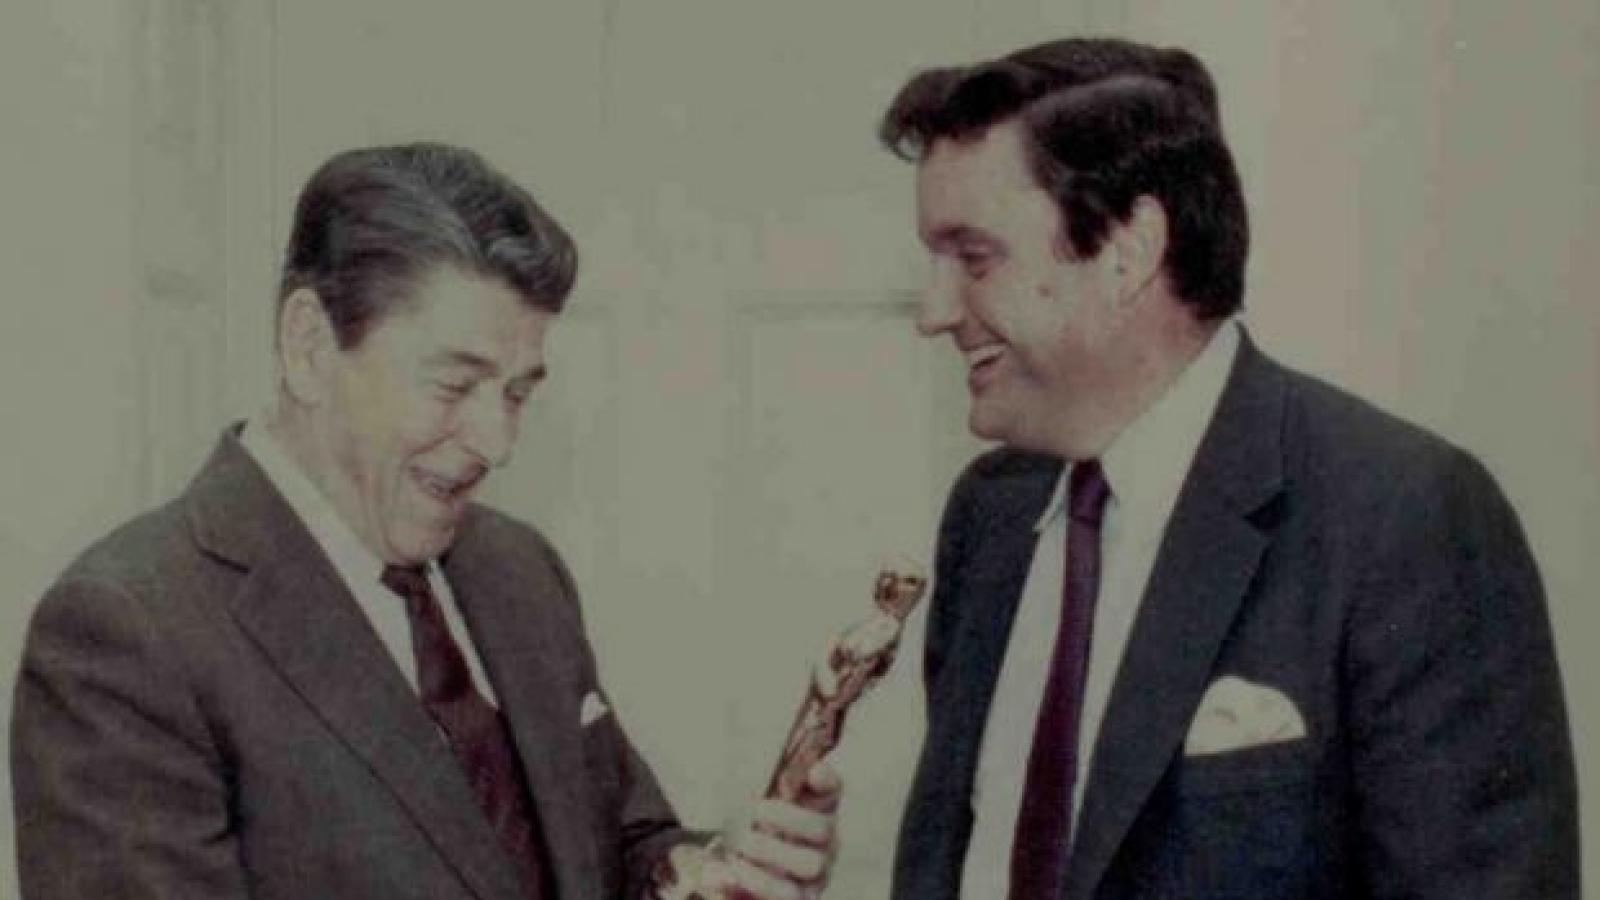 Frank Hodsoll shows Ronald Reagan the honorary Academy Award for the National Endowment for the Arts